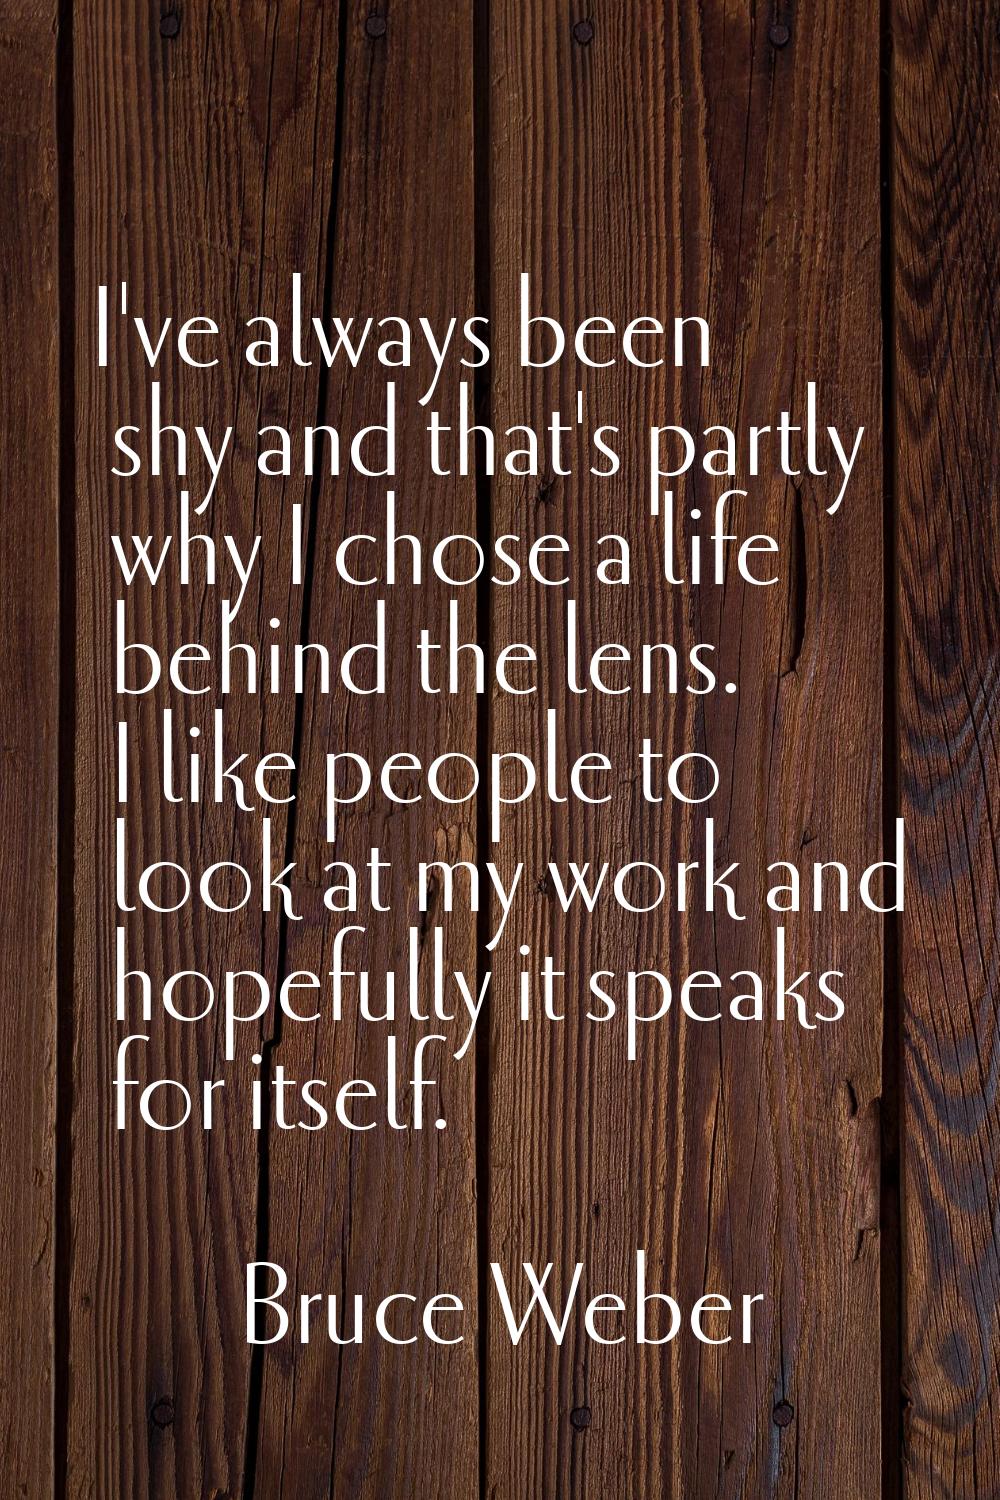 I've always been shy and that's partly why I chose a life behind the lens. I like people to look at